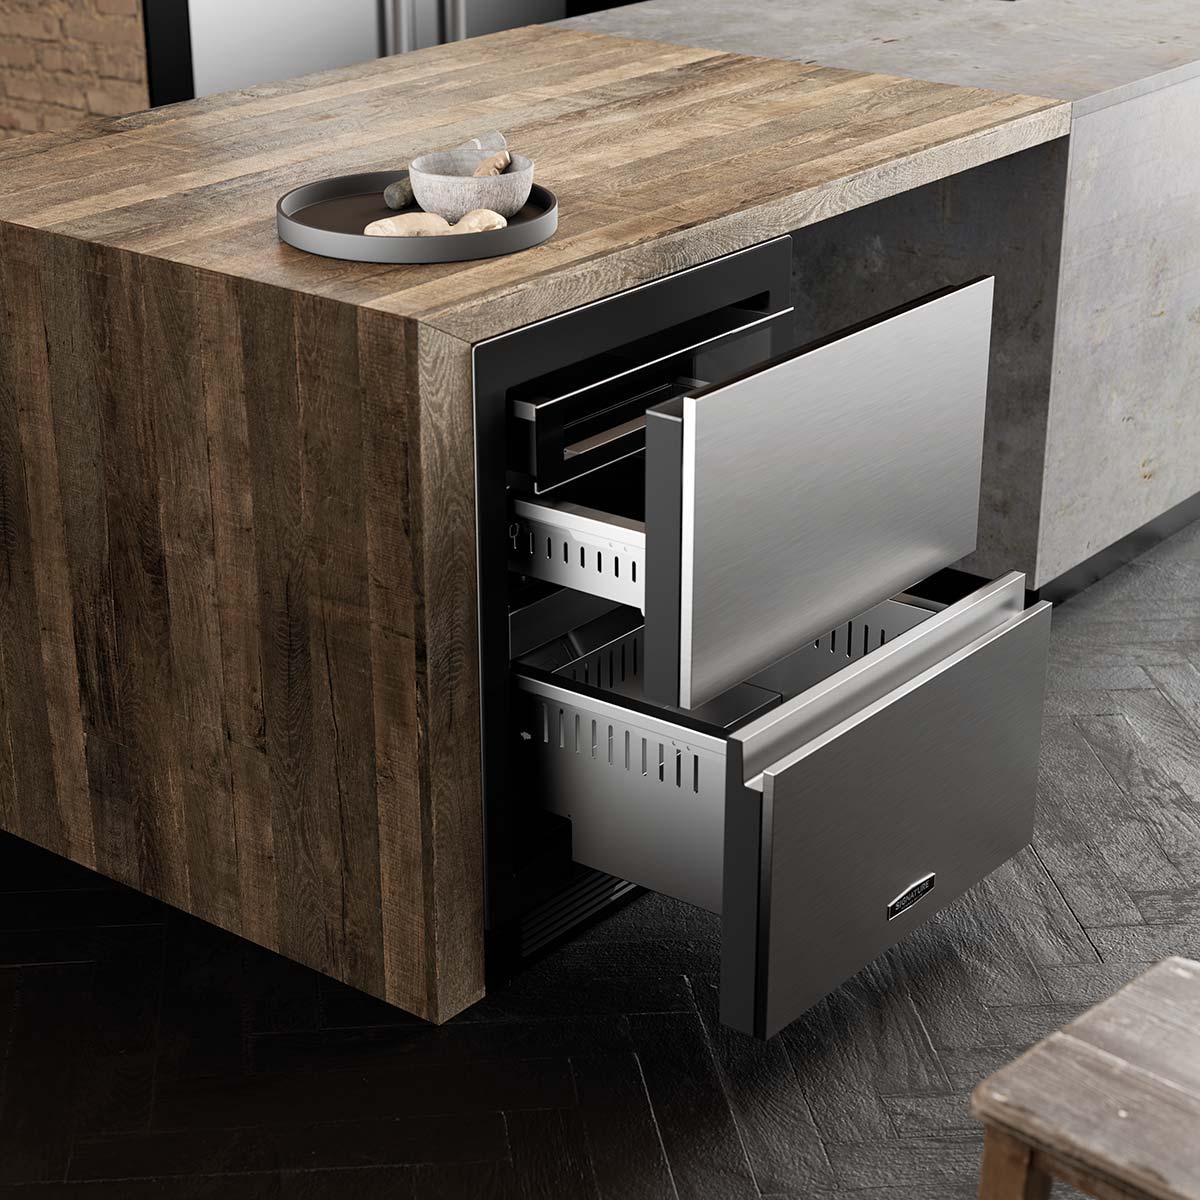 Undercounter Convertible Refrigerator by Signature Kitchen Suite